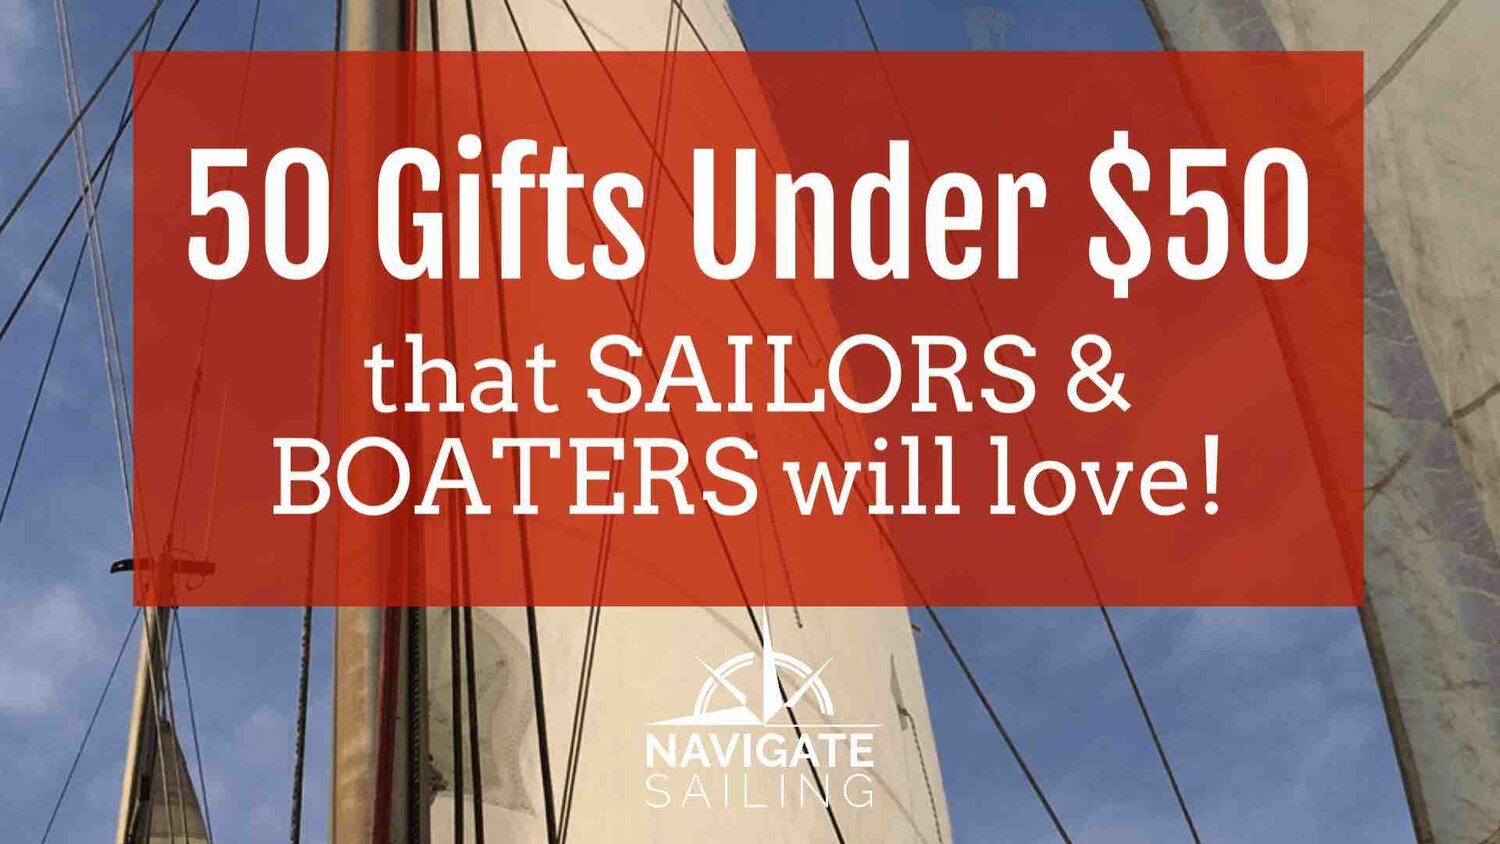 47 Splashing Gifts for Boaters  Boating gifts, Gifts for boaters, Gifts  for boat owners